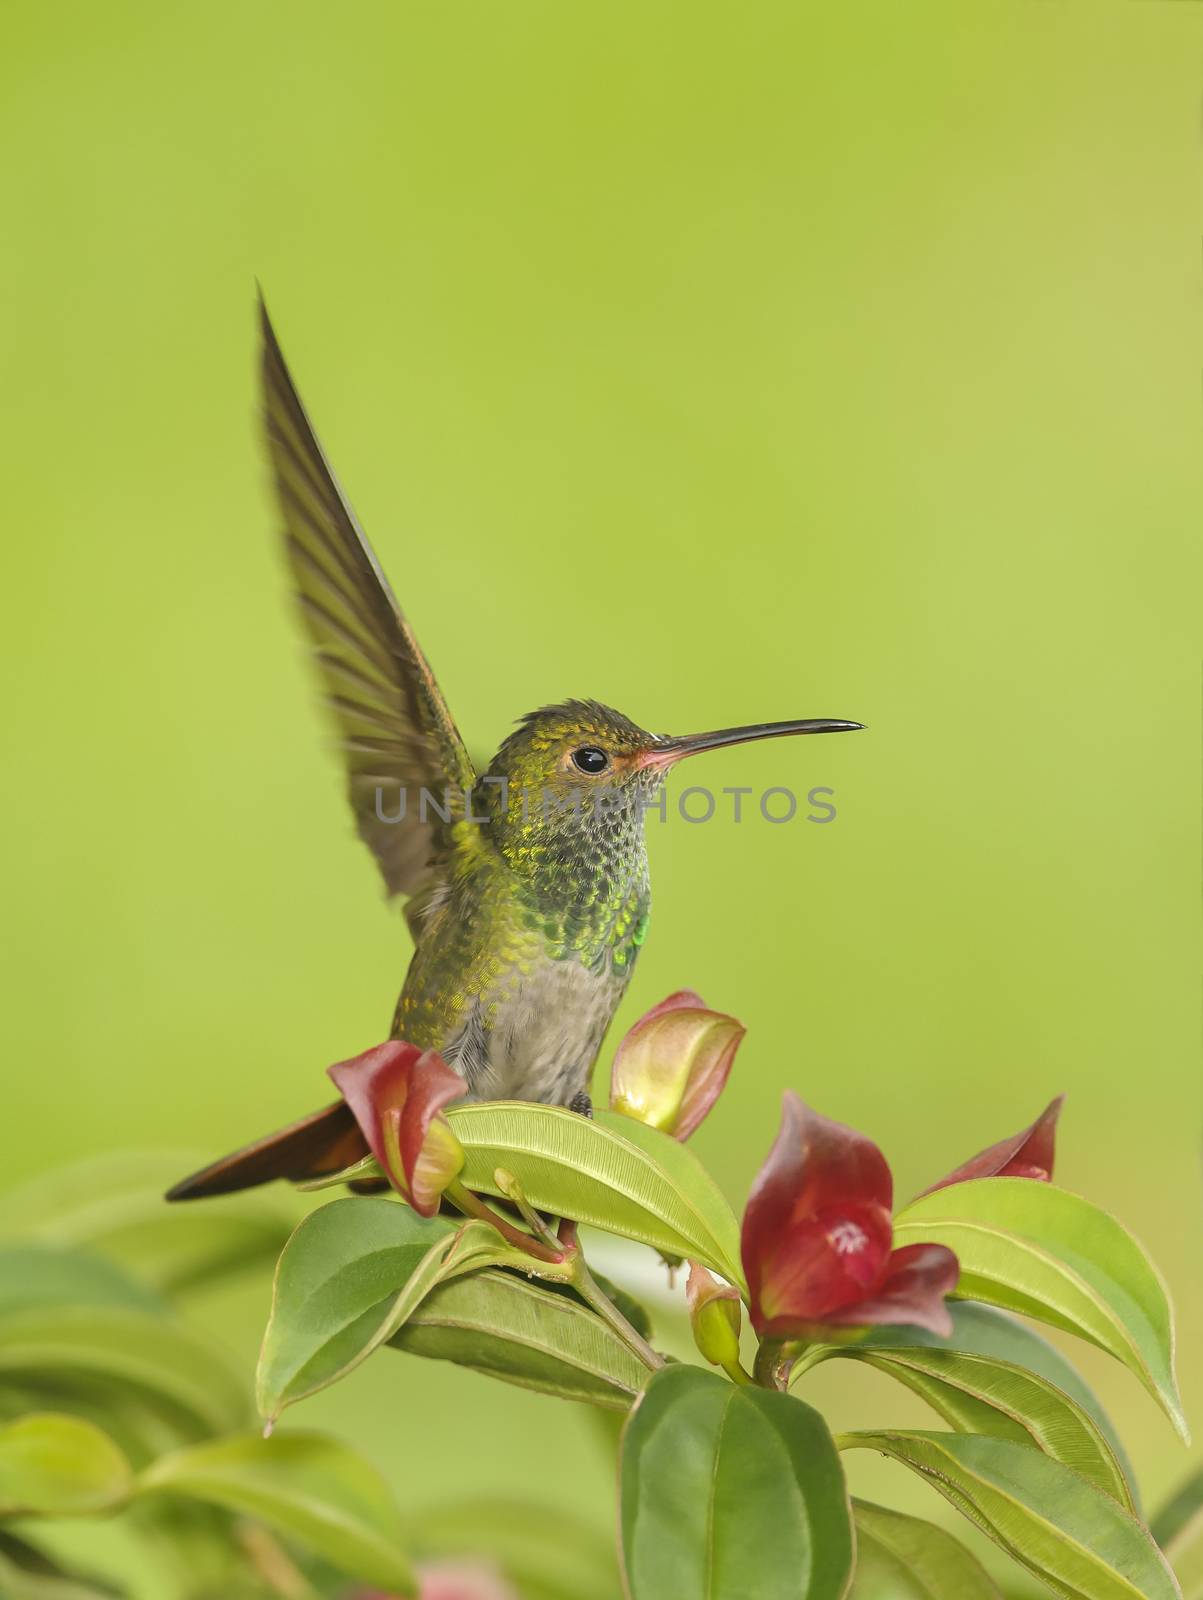 Rufous tailed hummingbird perching in a colorful tree photographed in Costa Rica.